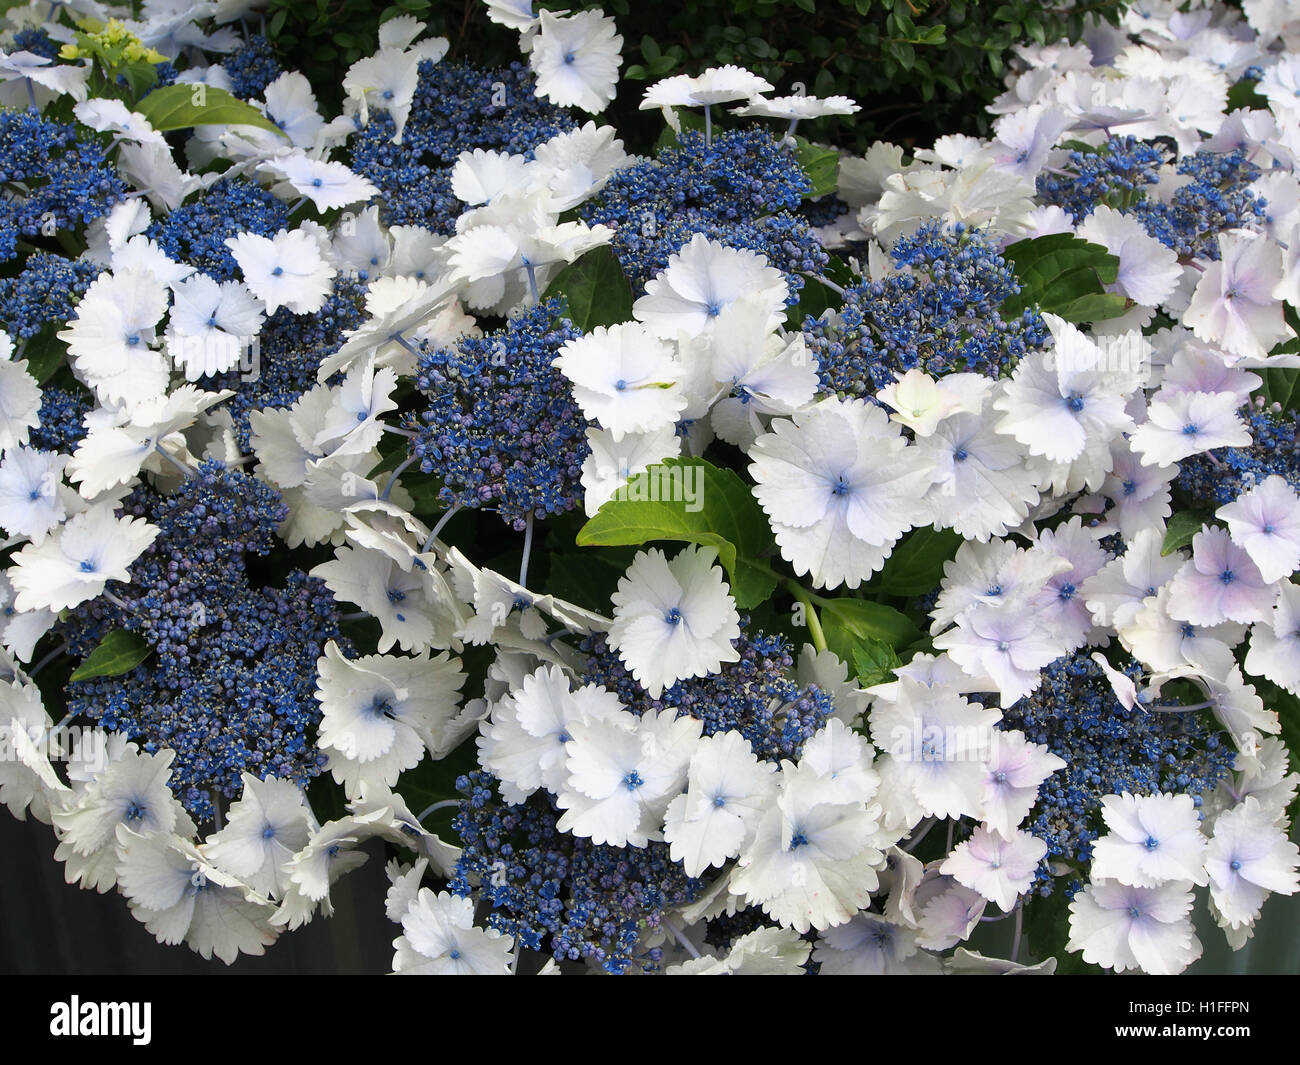 Blue and white Hydrangea acecap hydrangea in full bloom in July at Tatton Park Flower Show in Cheshire, England, UK  in 2016. Stock Photo